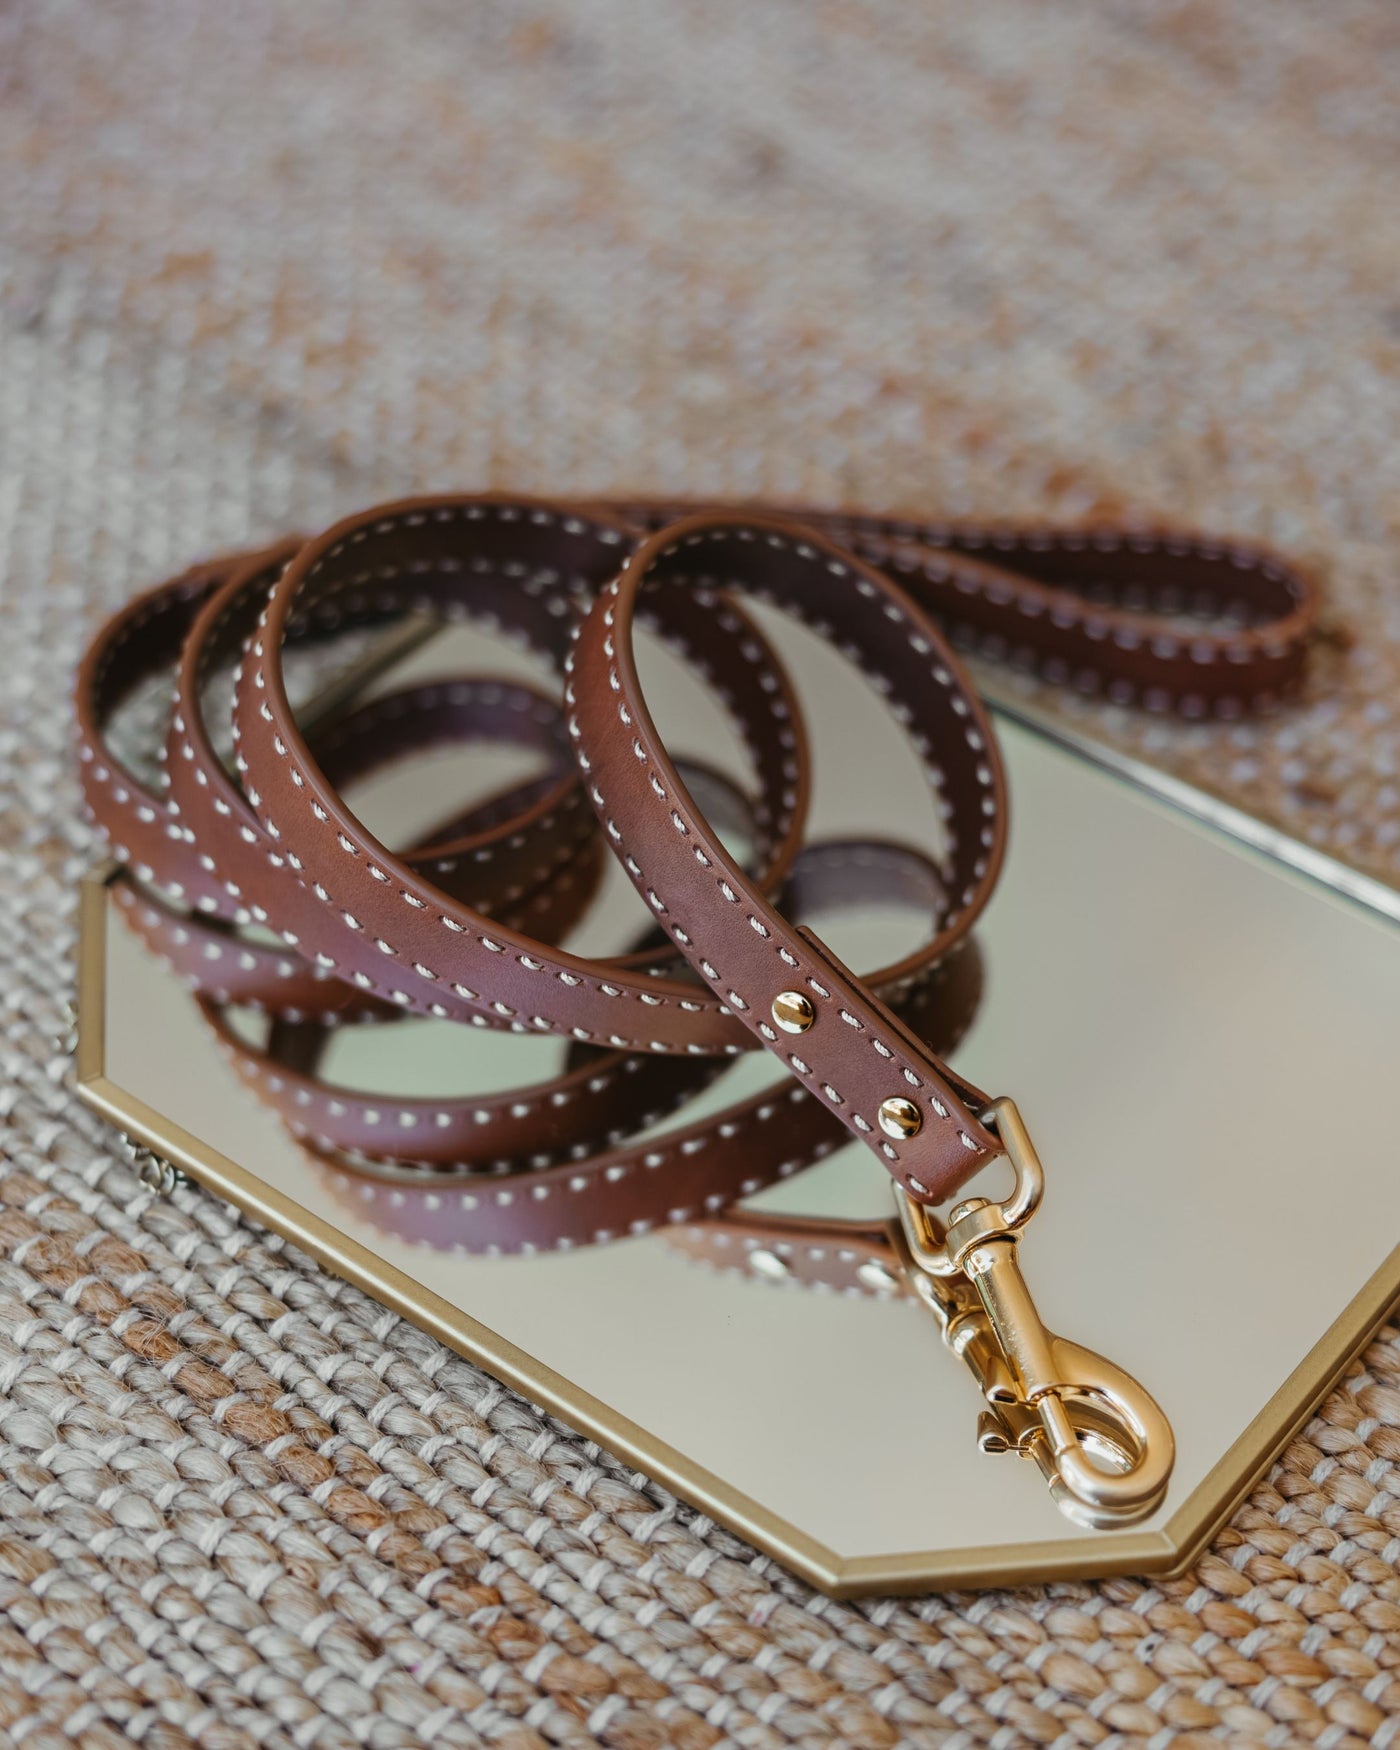 Take the Lead Tan Leather Leash Product Image Detail